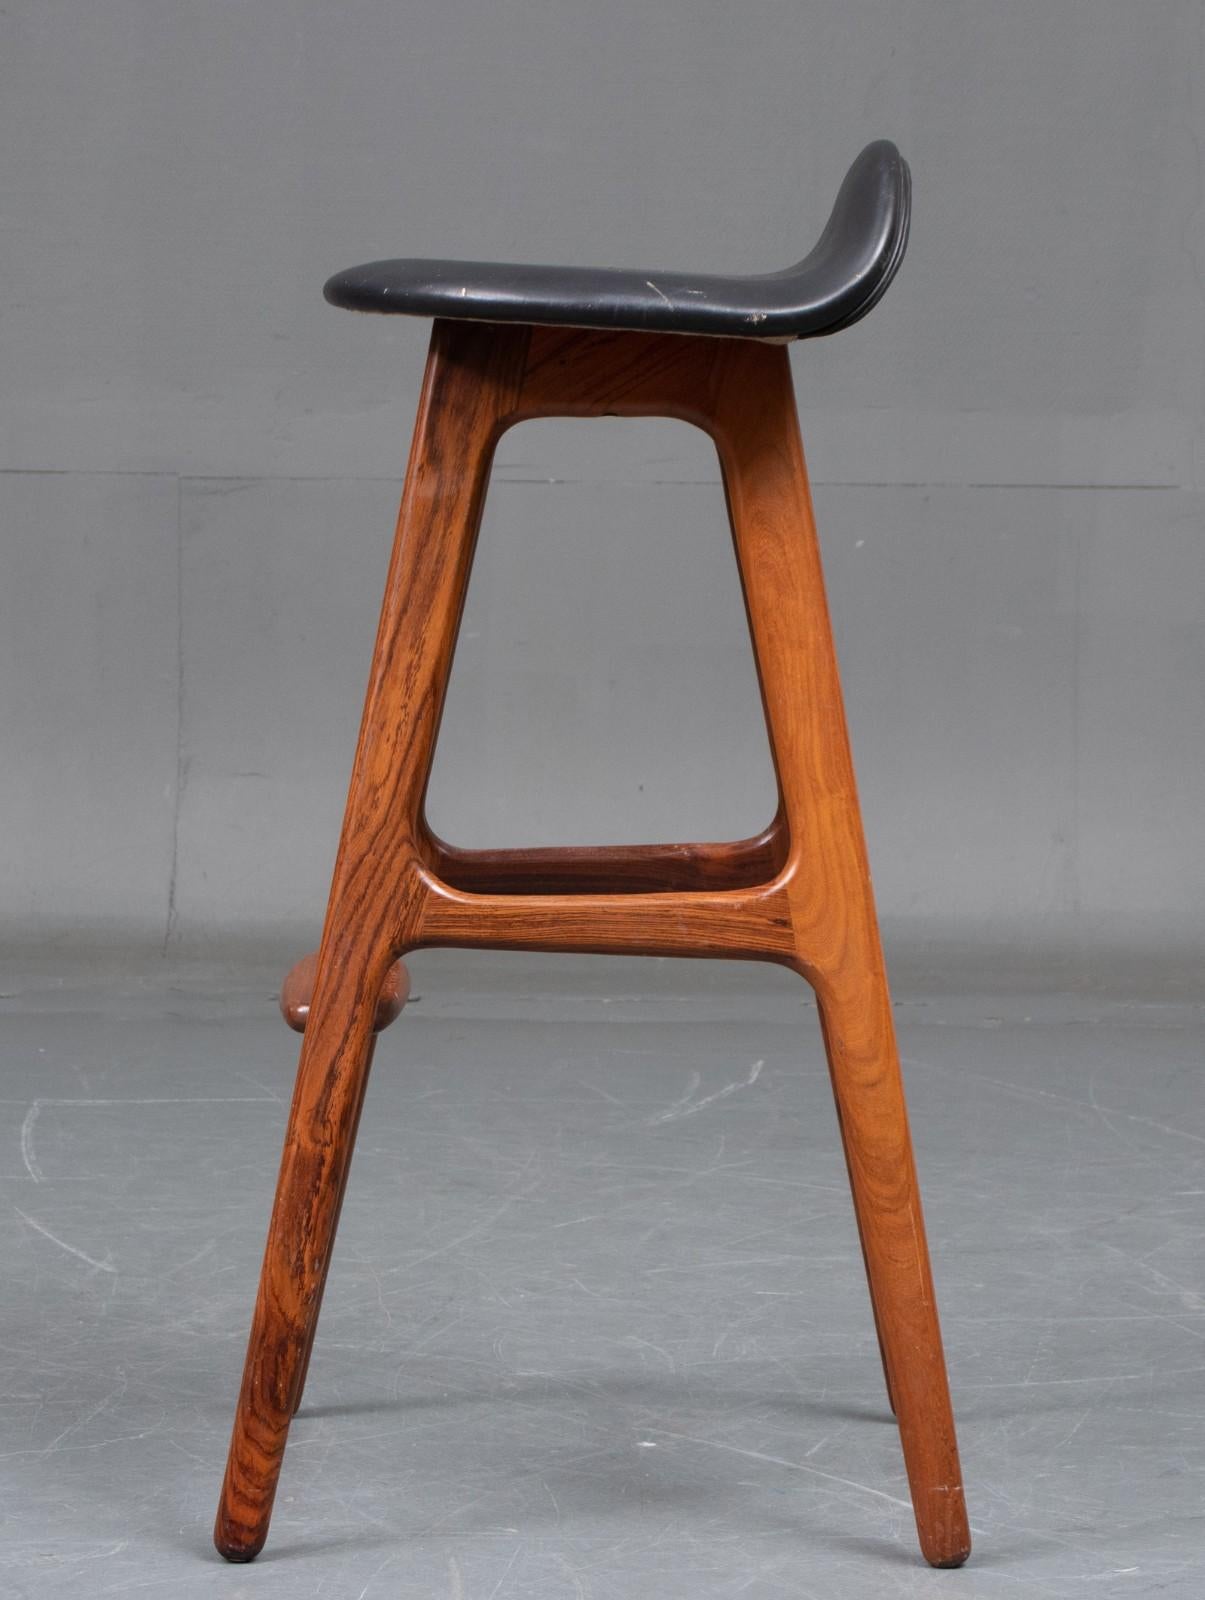 Erik Buck. Bar stool with solid hardwood frame with footrest, seat upholstered in black leather. Designed in 1965. Seat height 77cm. Manufactured by Oddense Maskinsnedkeri A / S, model OD 61. Appears with normal. age-related traces of use. 
Only